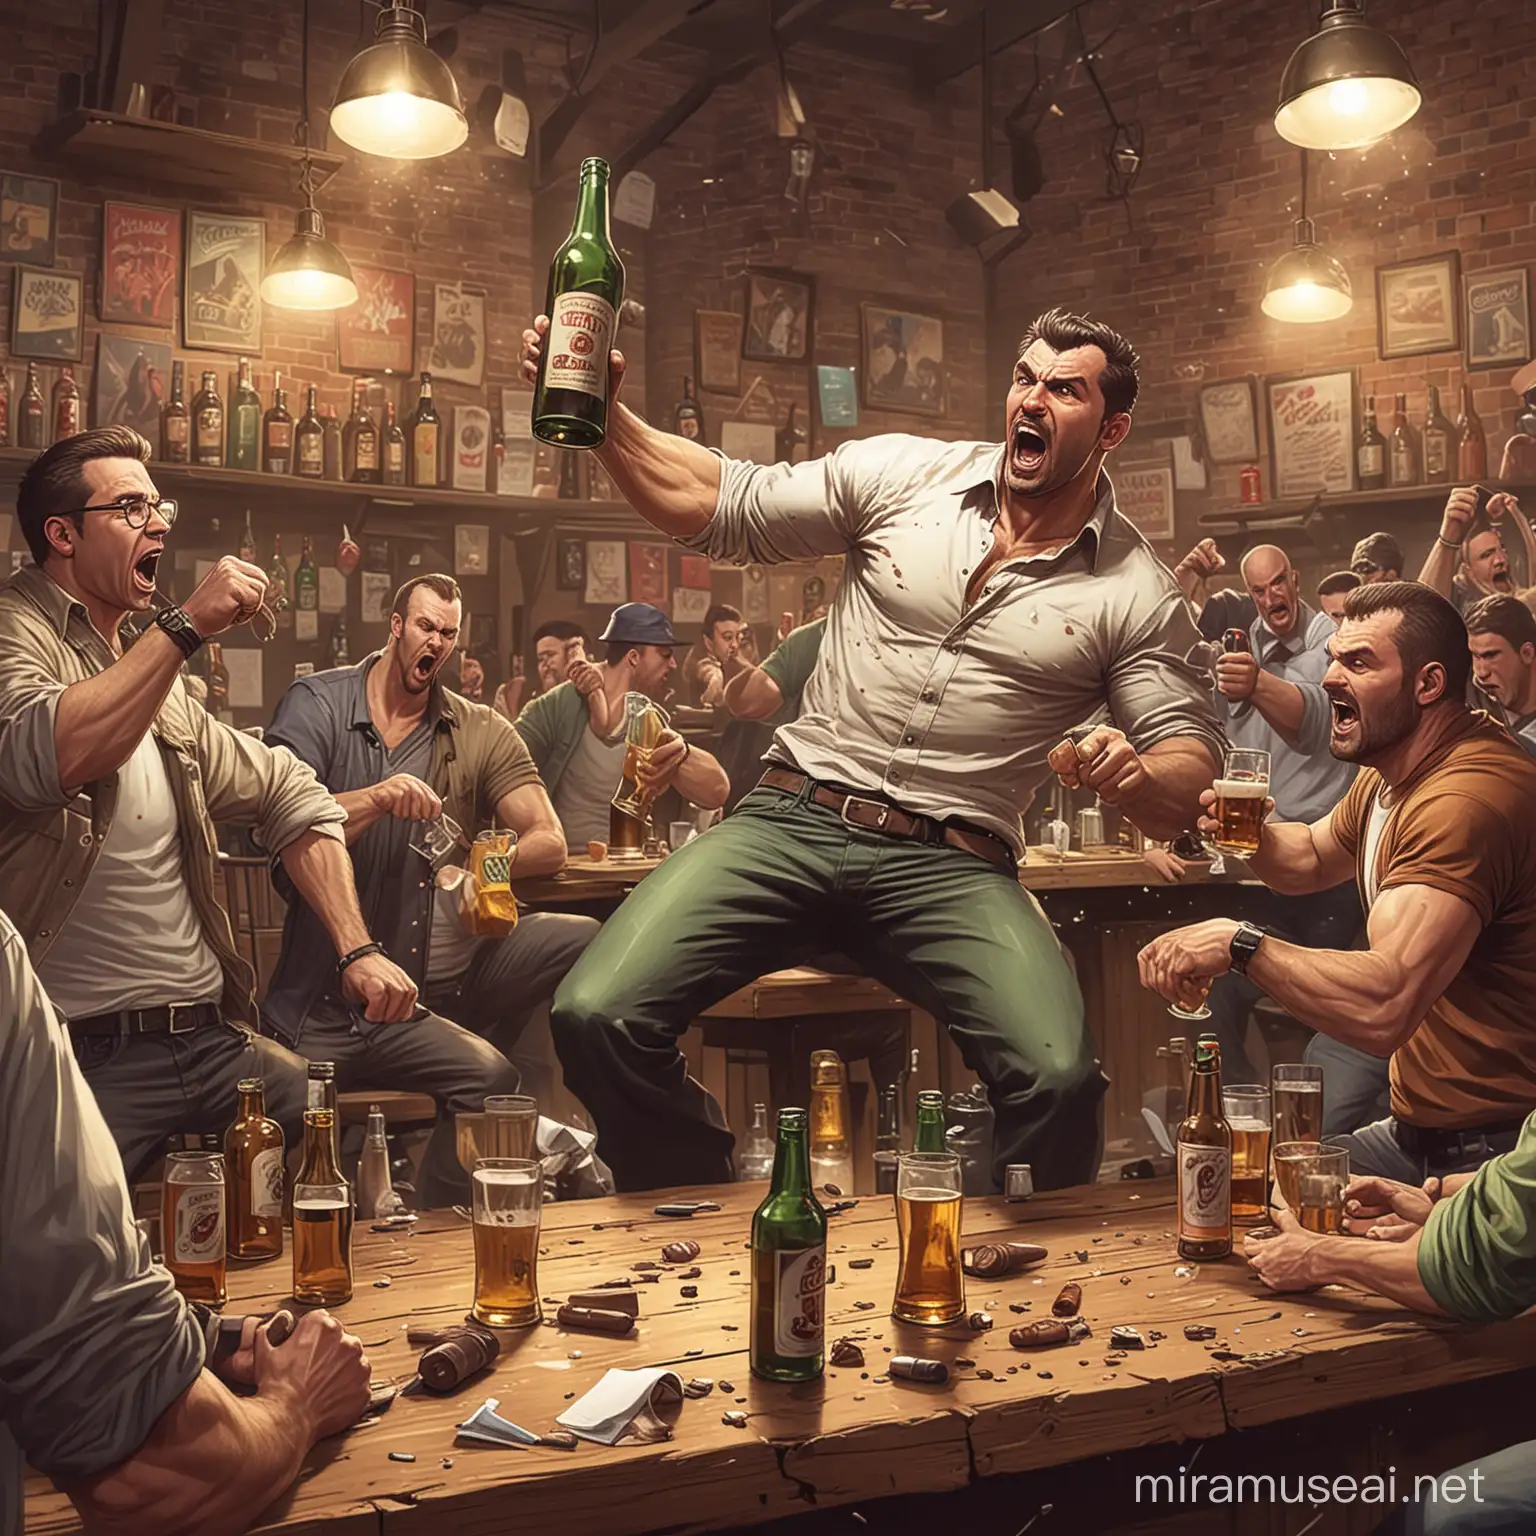 men at bar fighti during beer drining, gta comic style, a lot of chaos, flying chair and bottles
